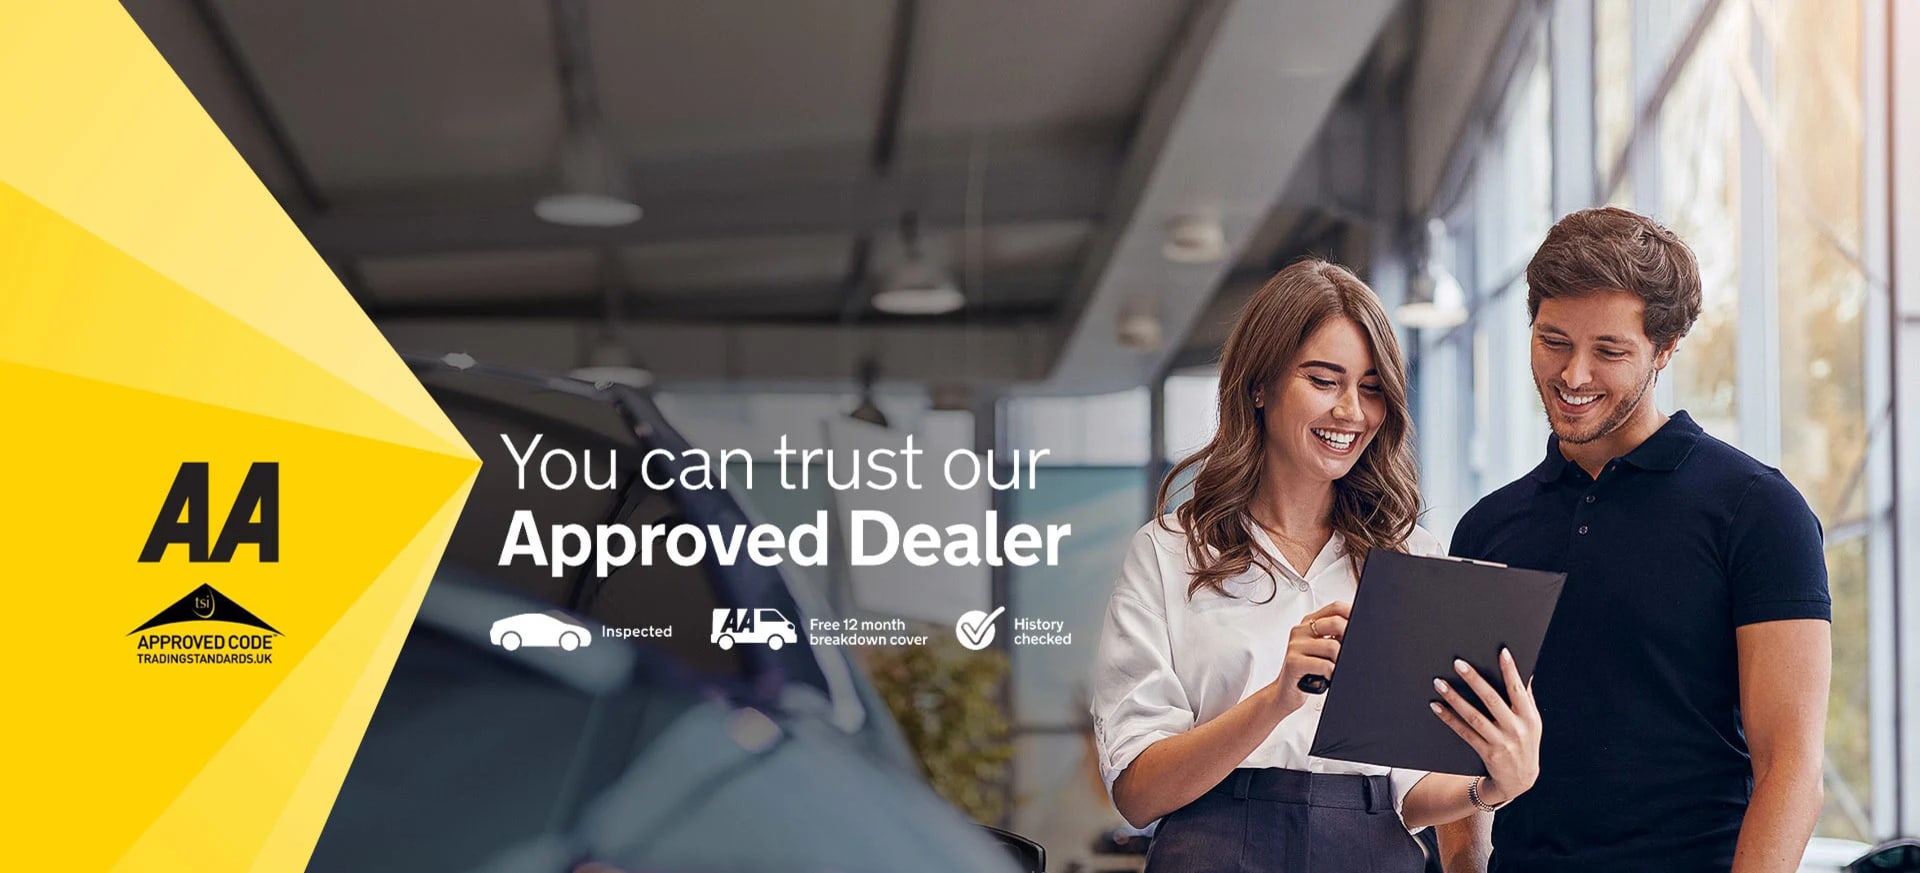 AA Trust - You Can Trust Our Approved Dealer.